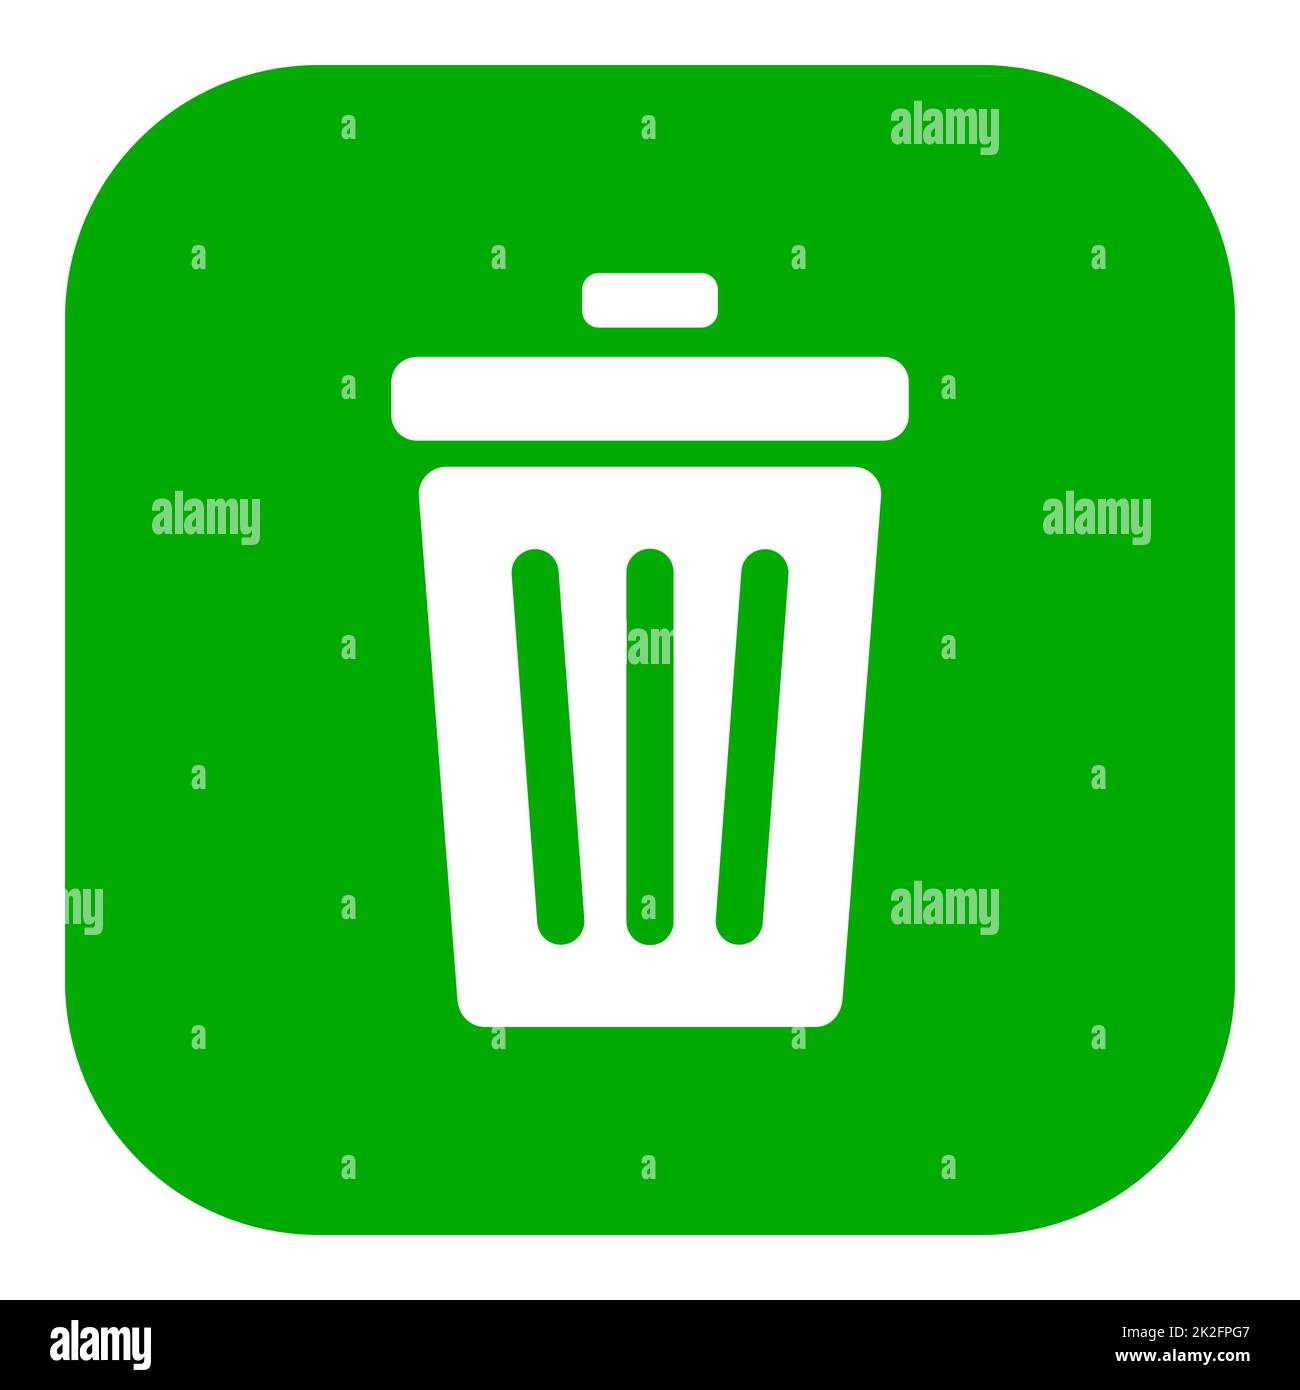 Waste bin and app icon Stock Photo